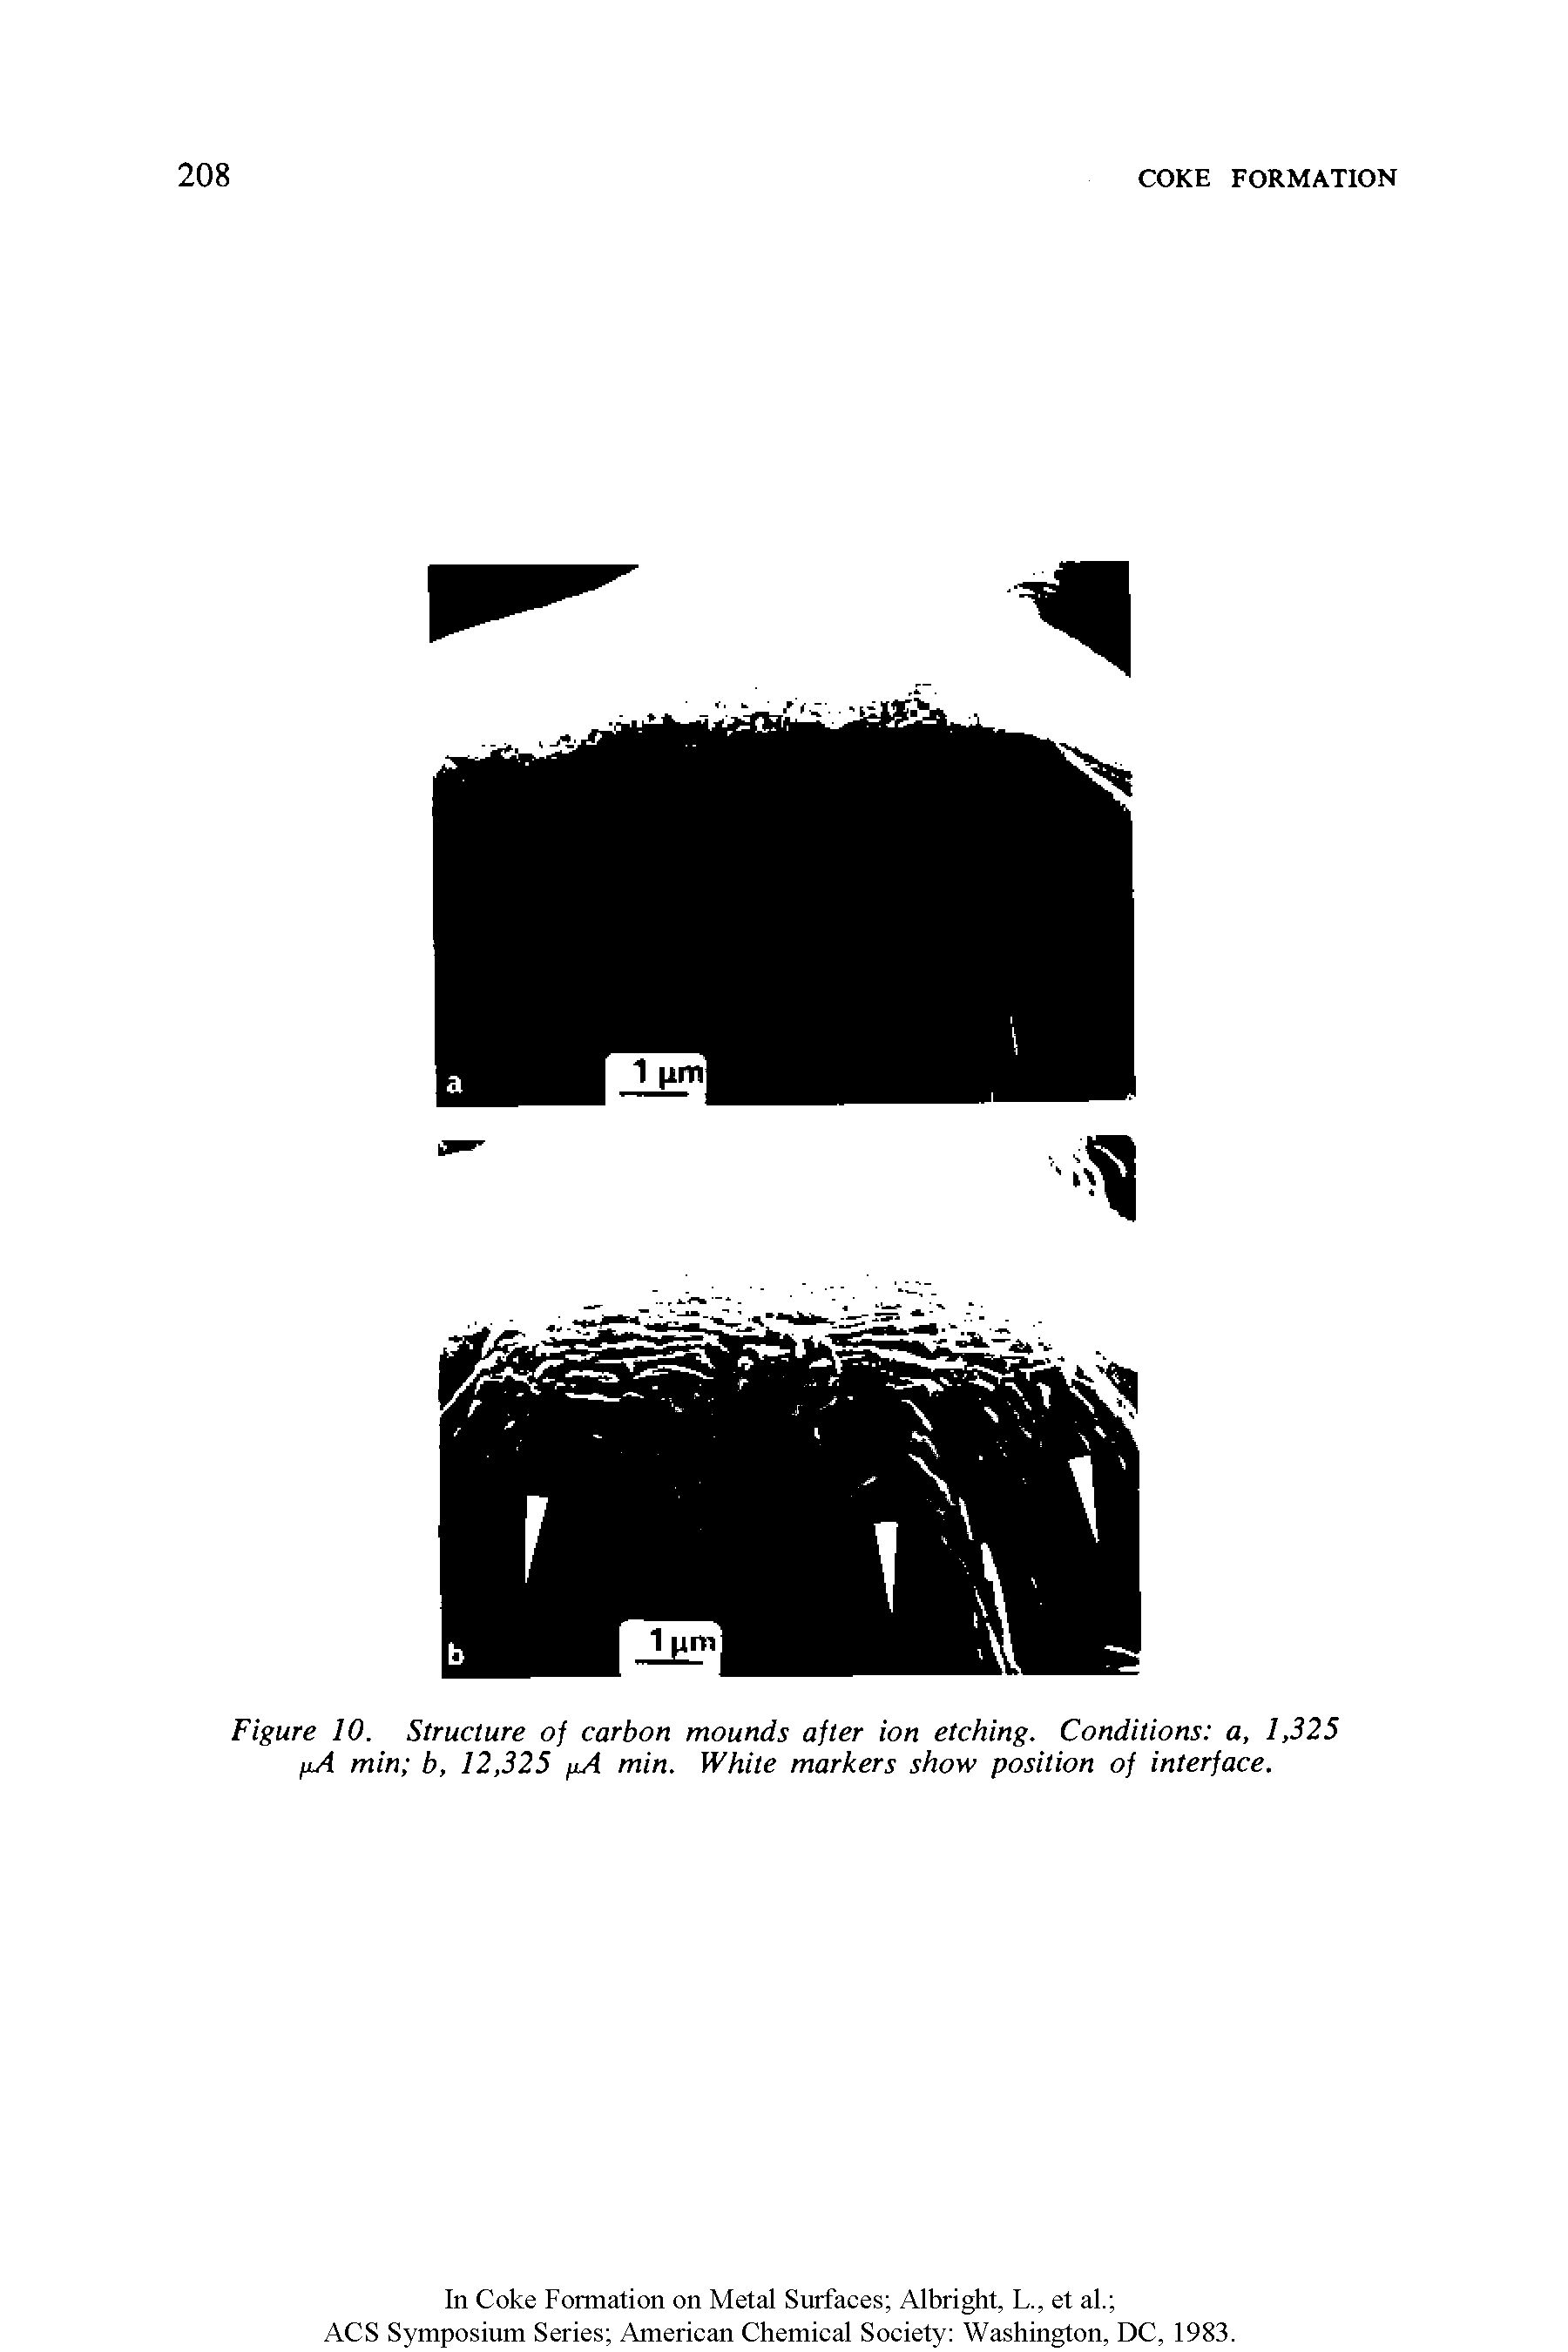 Figure 10. Structure of carbon mounds after ion etching. Conditions a, 1,325 jiA min b, 12,325 min. White markers show position of interface.